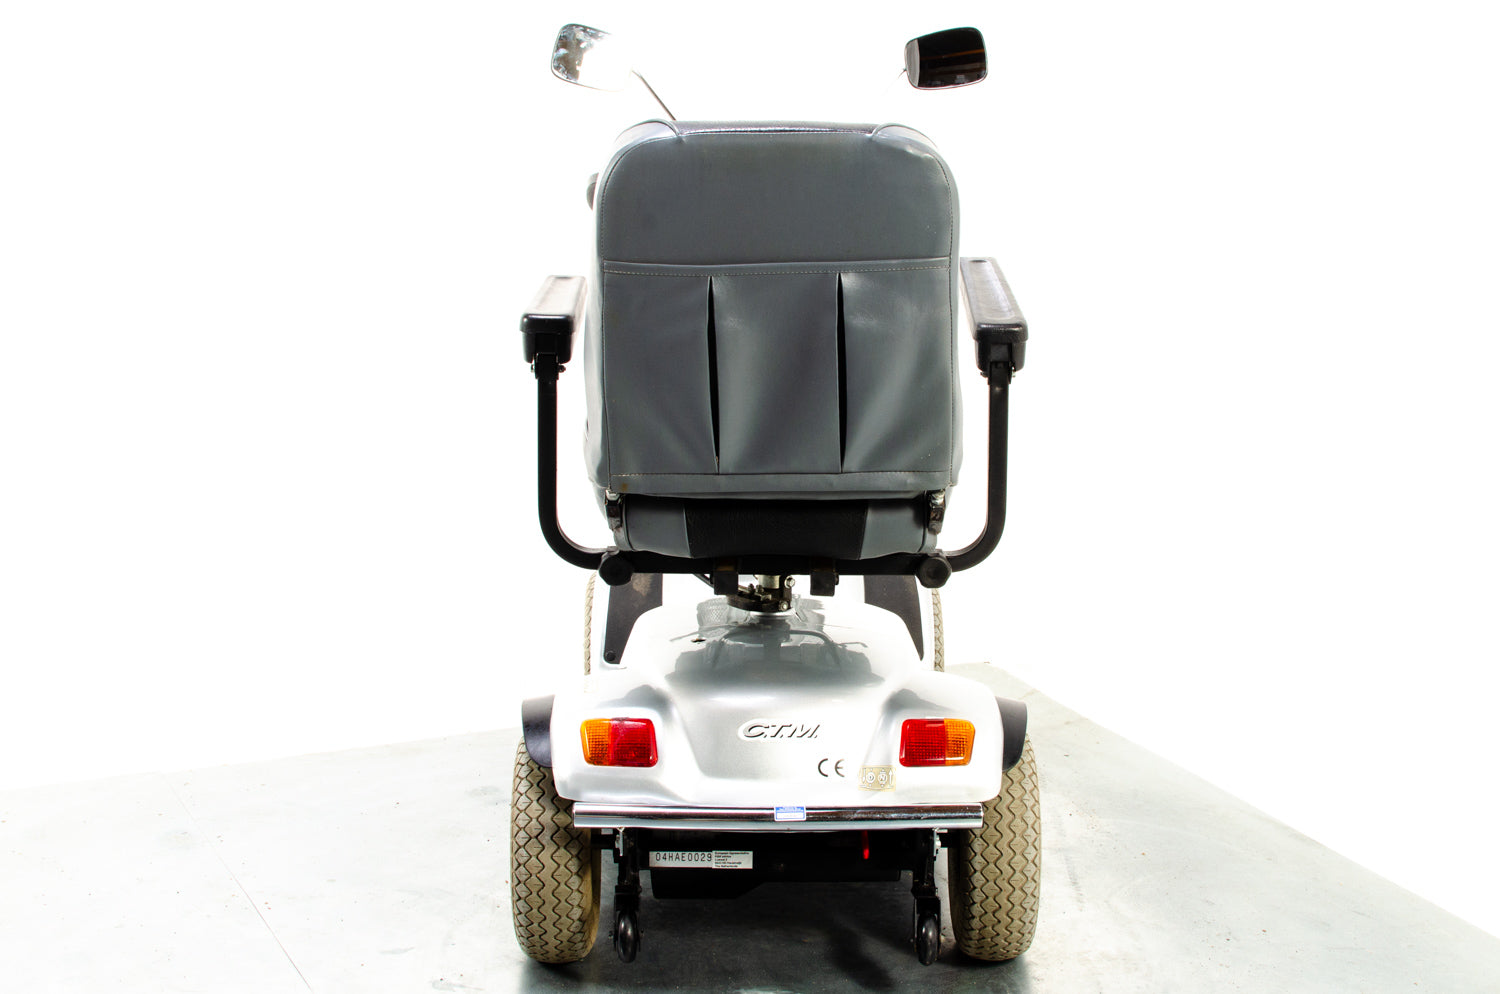 CTM HS-740 Used Mobility Scooter Midsize Pavement Comfy Bariatric Pneumatic Tyres Silver